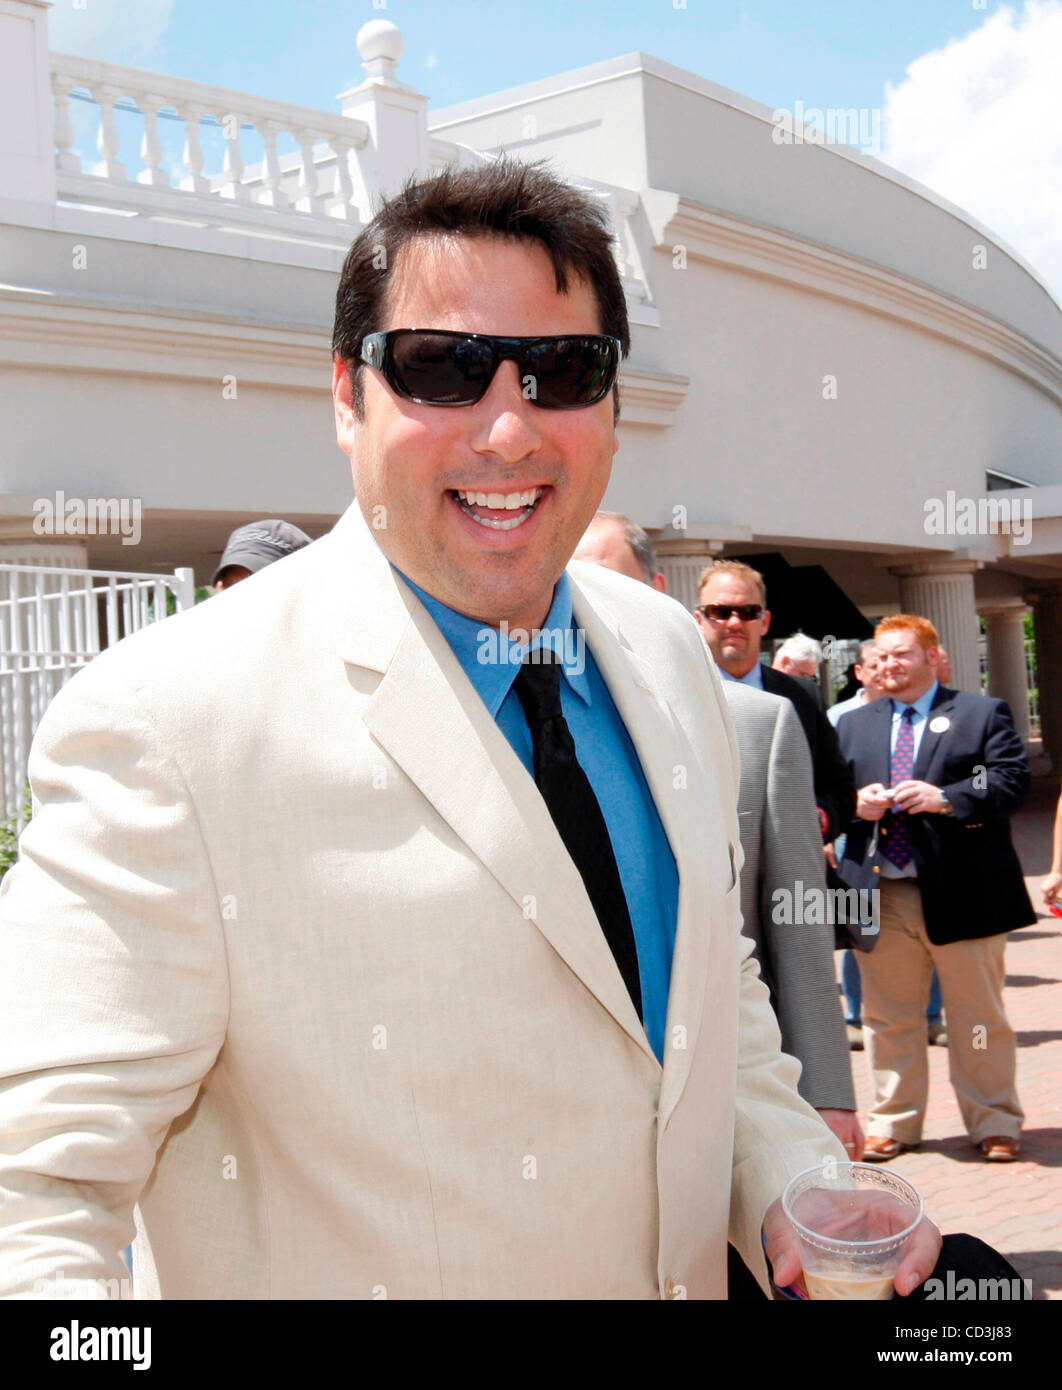 Television actor Greg Grunberg arrived at the 134th running of the Kentucky Derby Saturday May 3, 2008, at Churchill Downs, Louisville, Ky. Photo by Charles Bertram | Staff Stock Photo